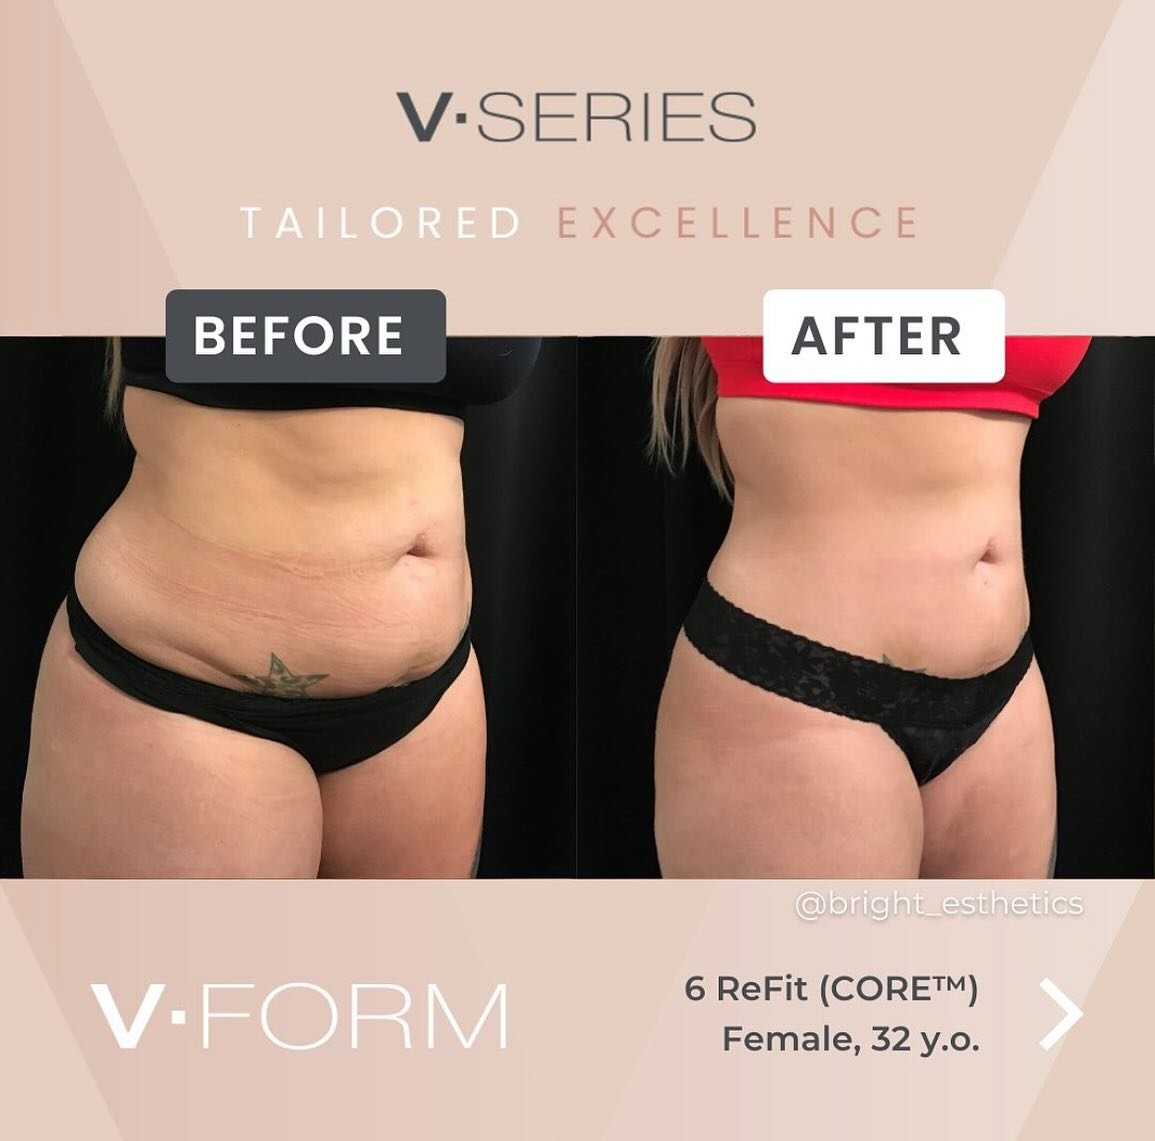 No Pain, All Gain: V-FORM delivers long lasting, life changing results, without the need for any incisions or anesthesia. 

RF energy works on the sub-dermal level stimulating collagen production, restoring skin elasticity, and blasting away fat cell